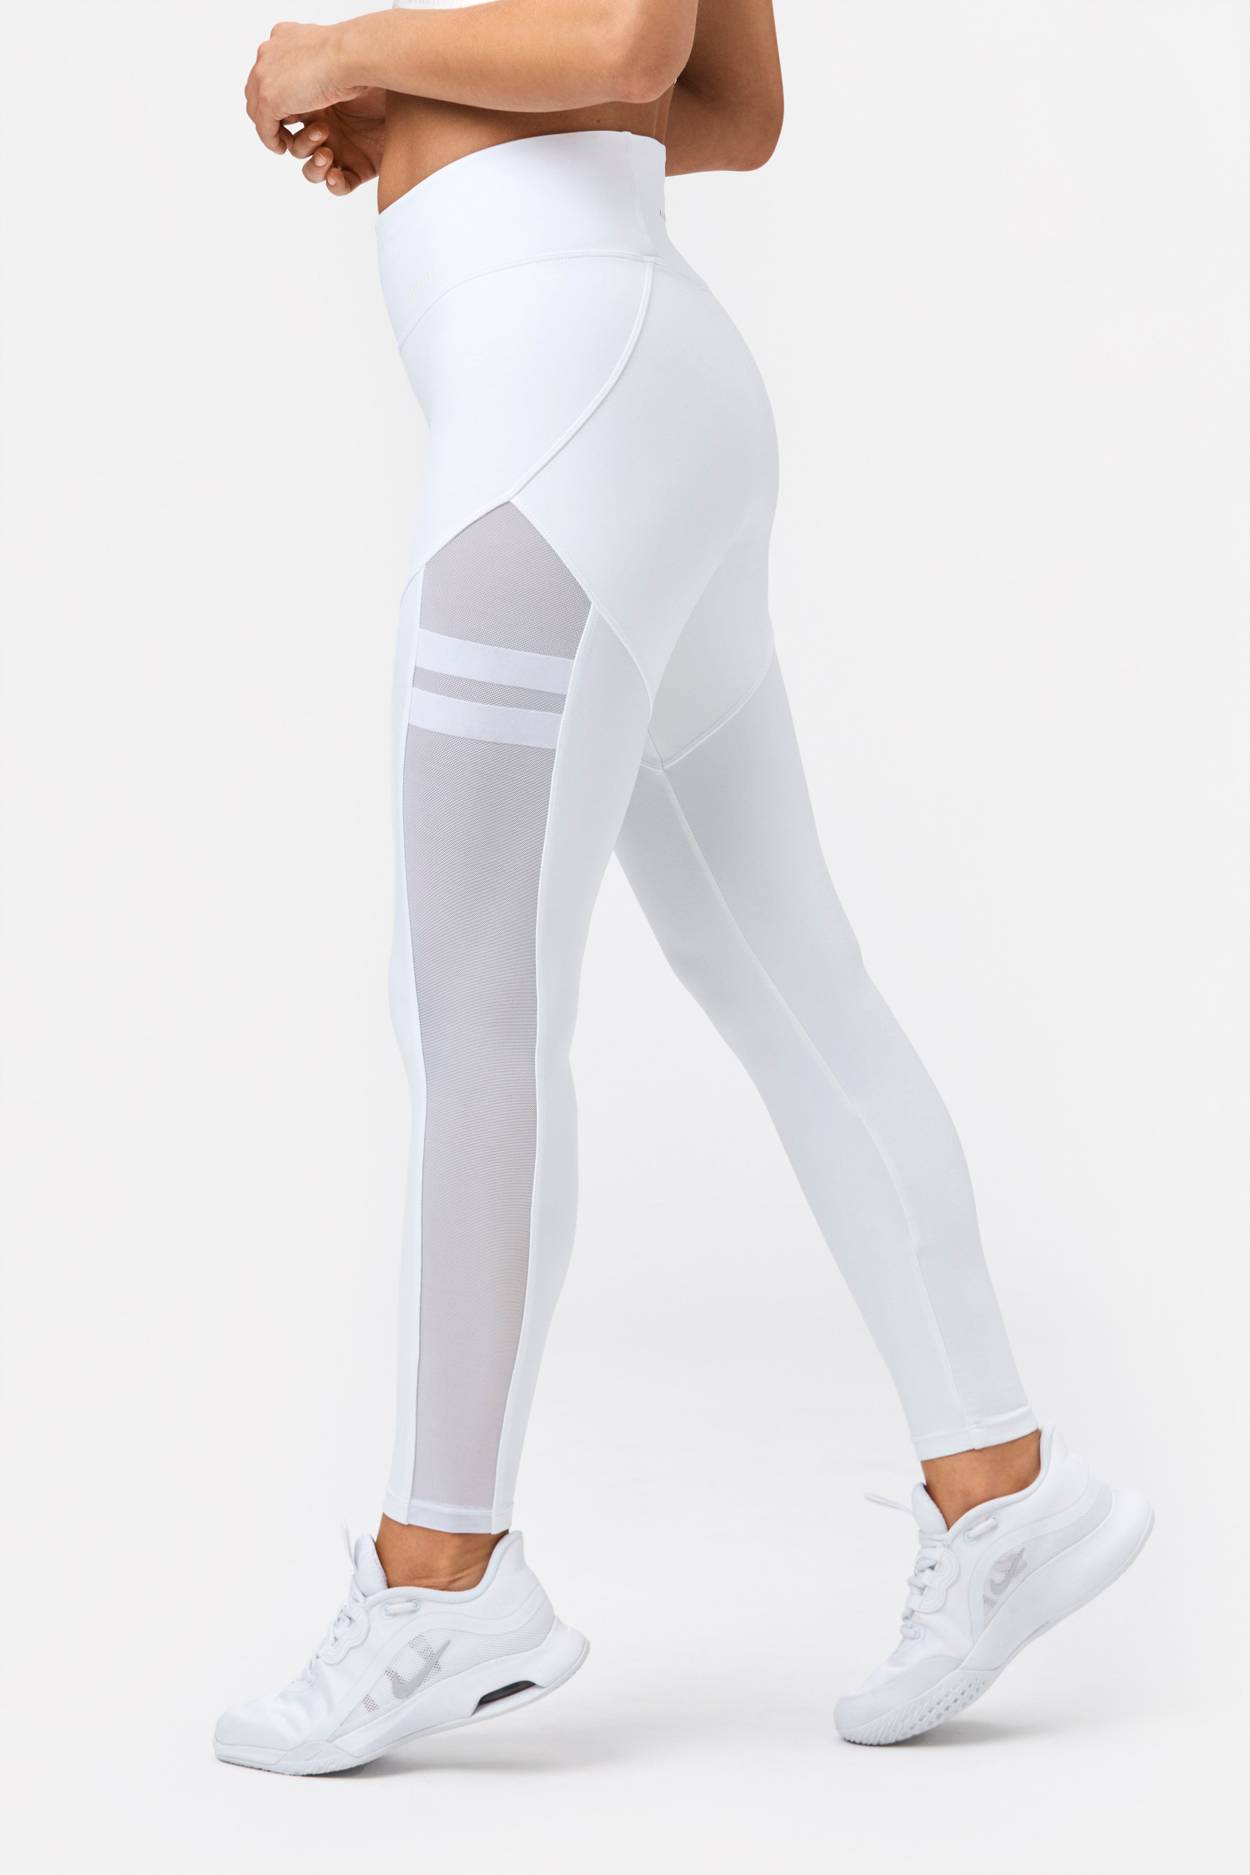 Love and Fit | Guardian Evolve Leggings